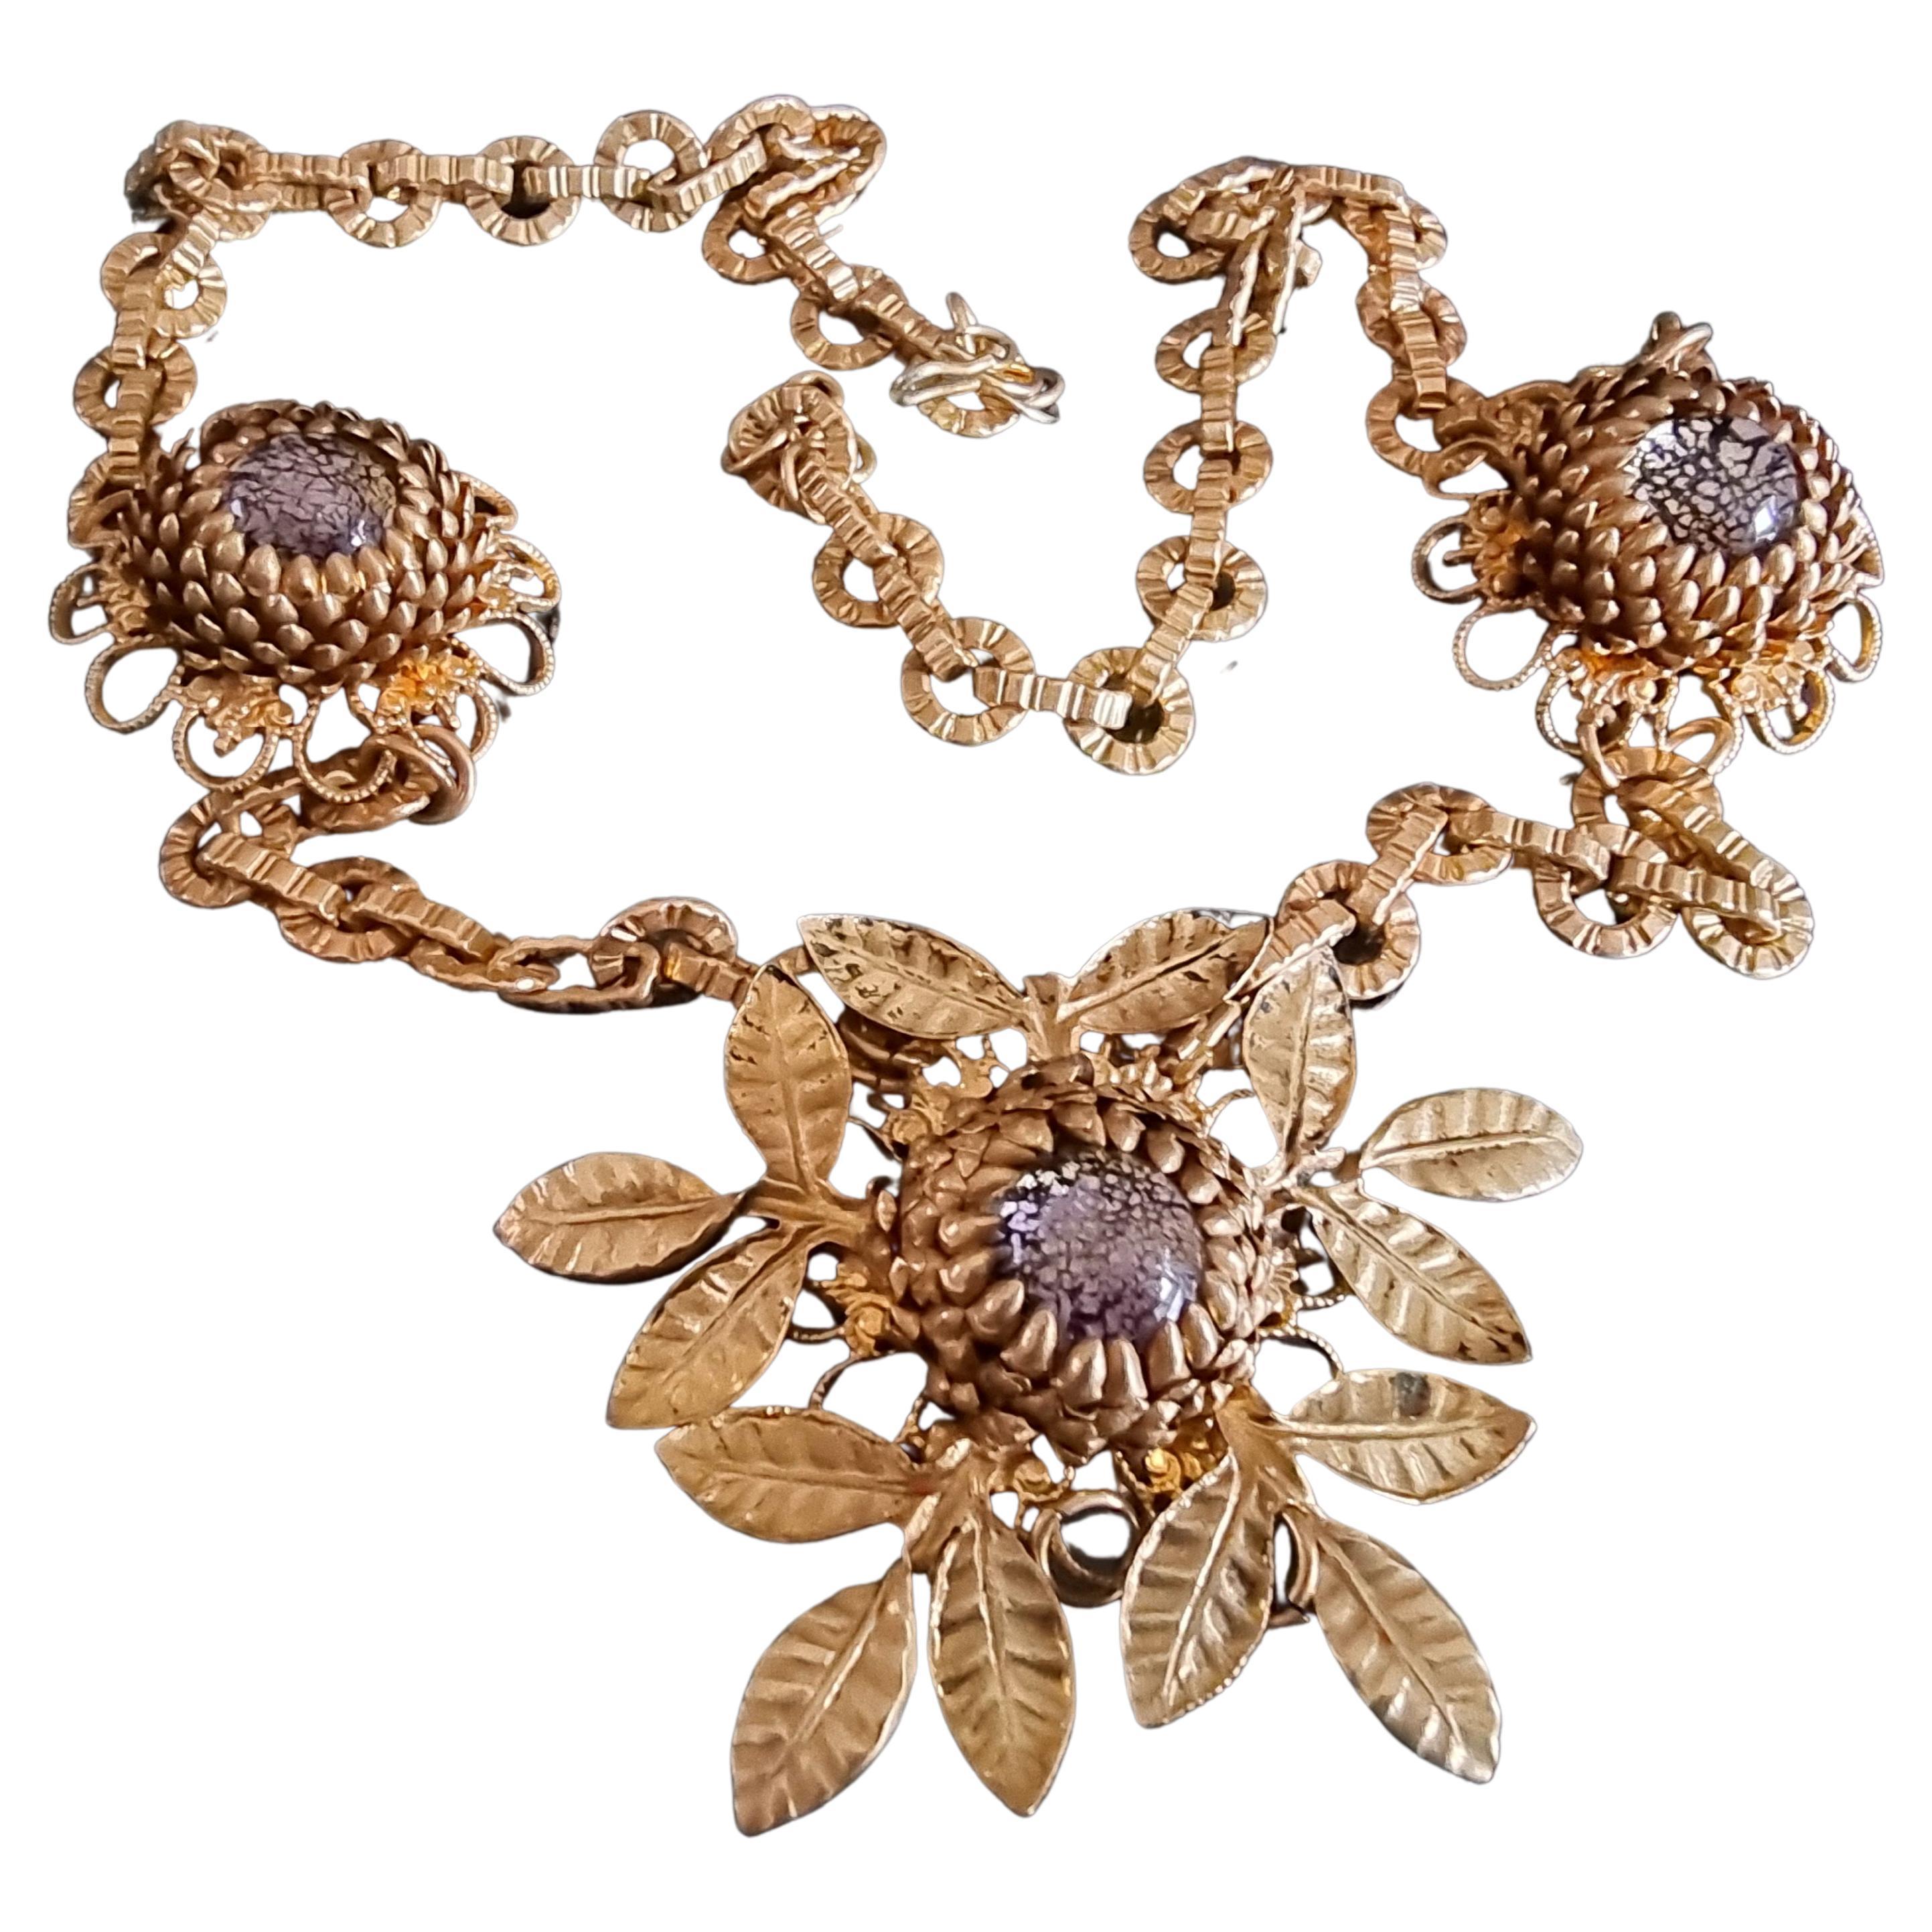 CIS countess Cissy ZOLTOWSKA, Magnificent old NECKLACE, vintage High Fashion For Sale